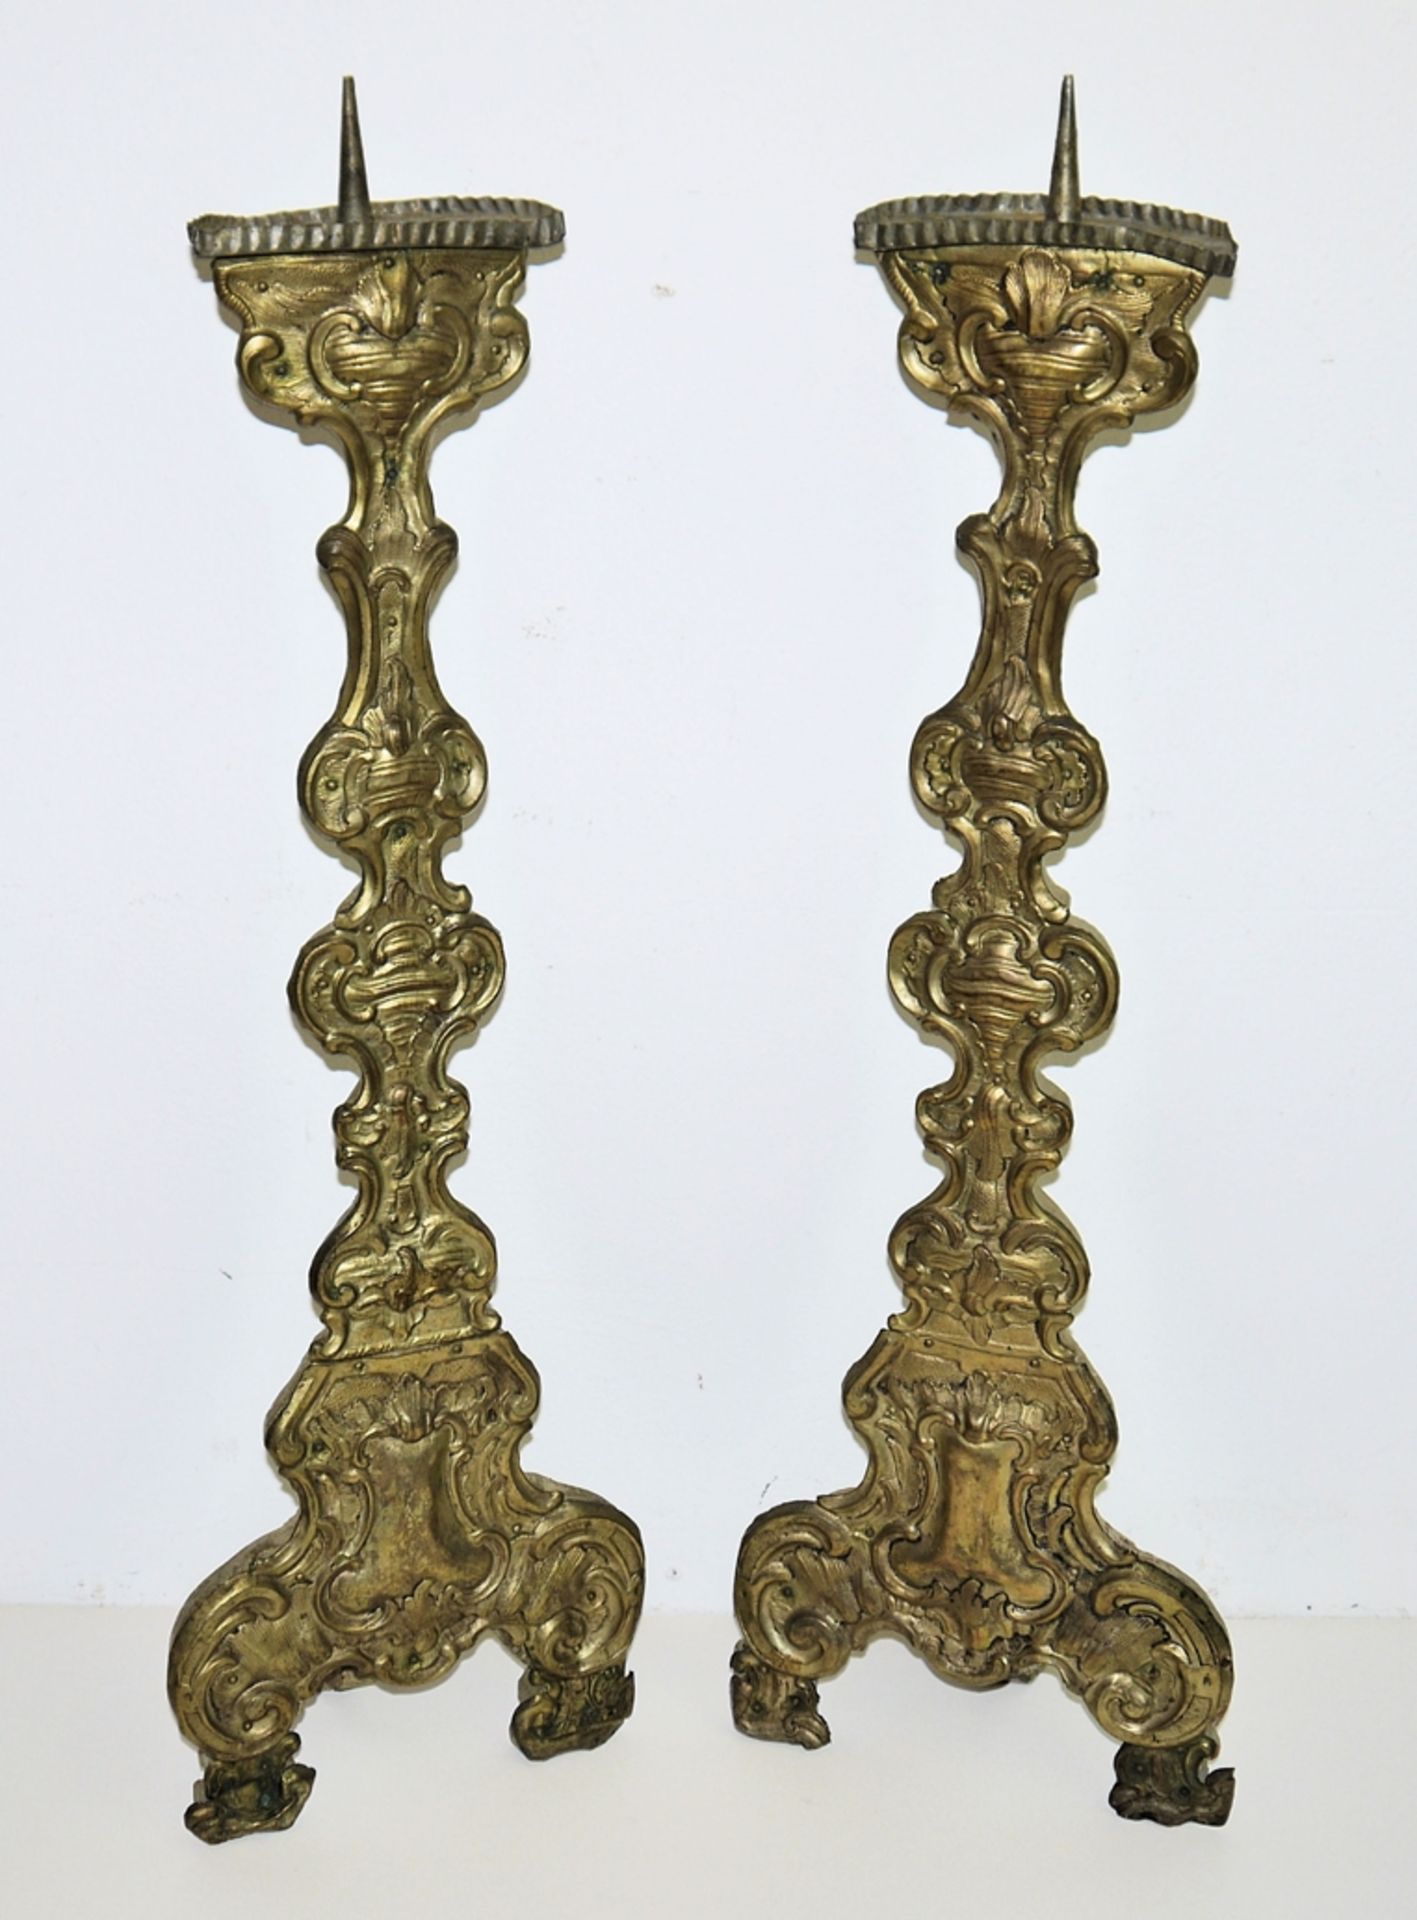 Pair of Baroque altar chandeliers, 18th century